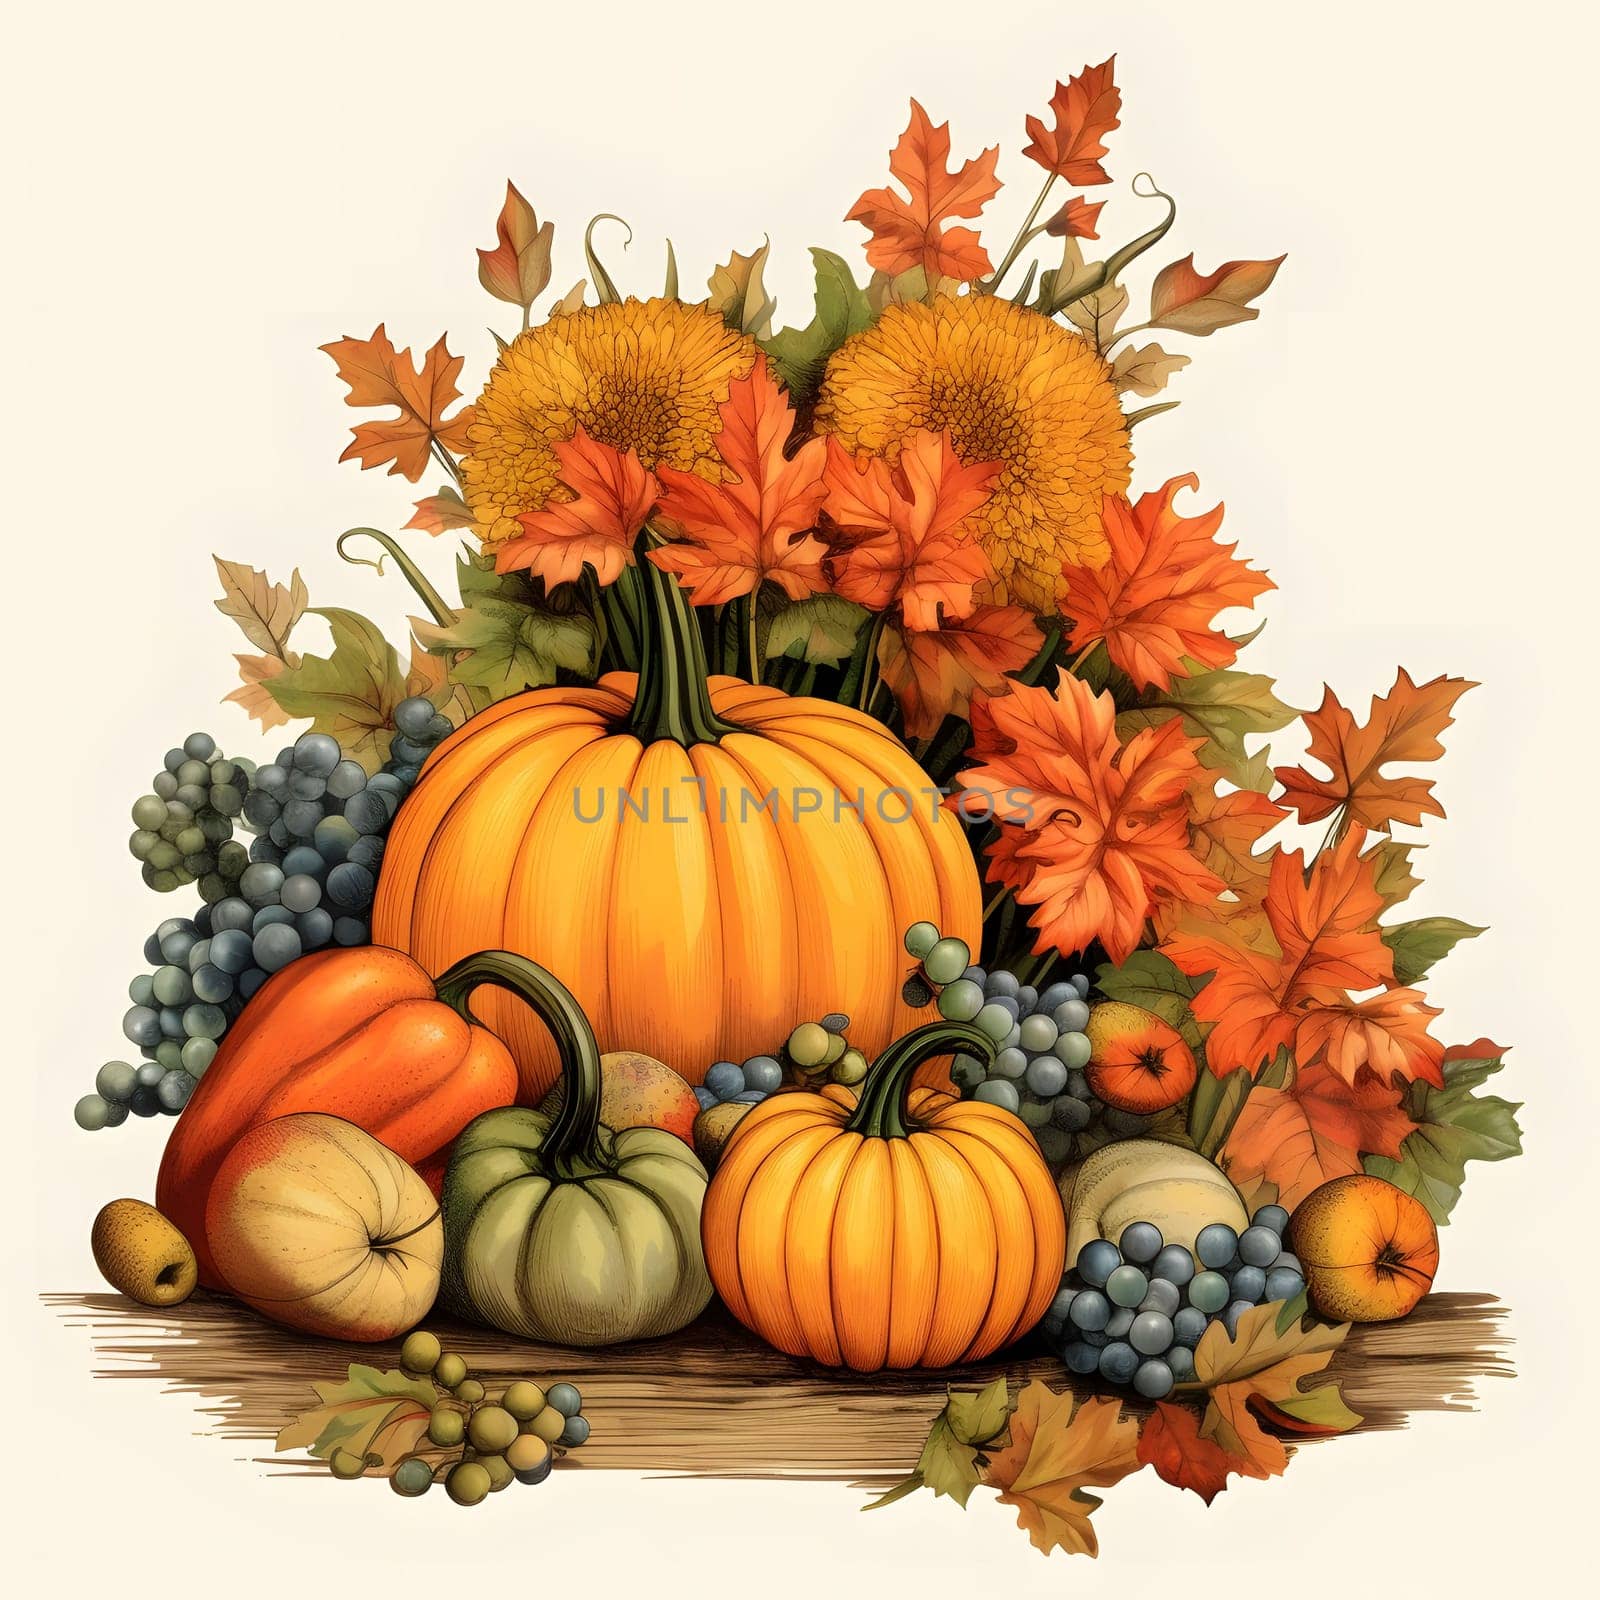 Illustration of pumpkin pie on a solid dark background. Pumpkin as a dish of thanksgiving for the harvest. The atmosphere of joy and celebration.